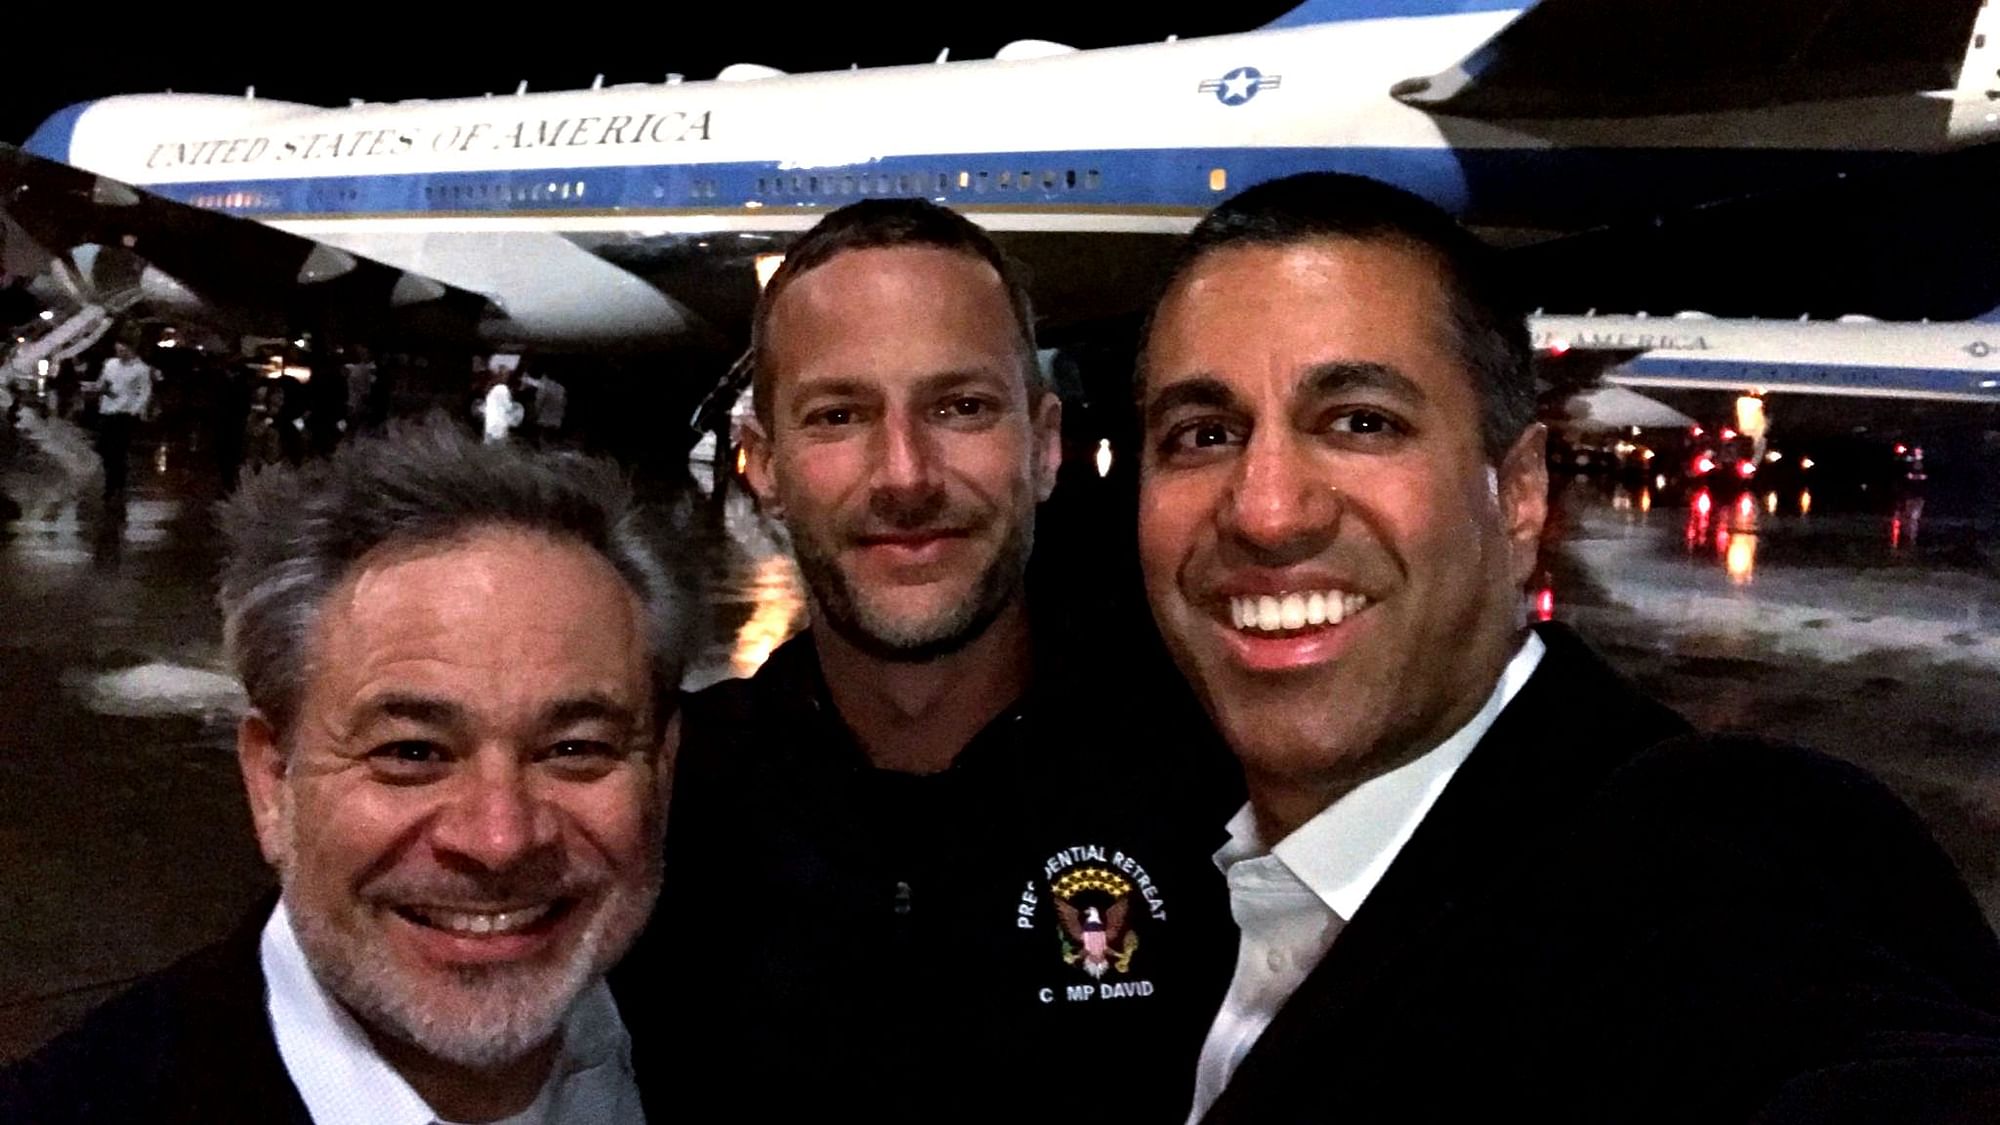 From right to left, Dan Brouillette, US Secretary of Energy, Adam Boehler, CEO of US International Development Finance Corporation and Ajit Pai, Chairman of the U.S. Federal Communications Commission waiting to board Air Force One for President Trump’s inaugural India visit.